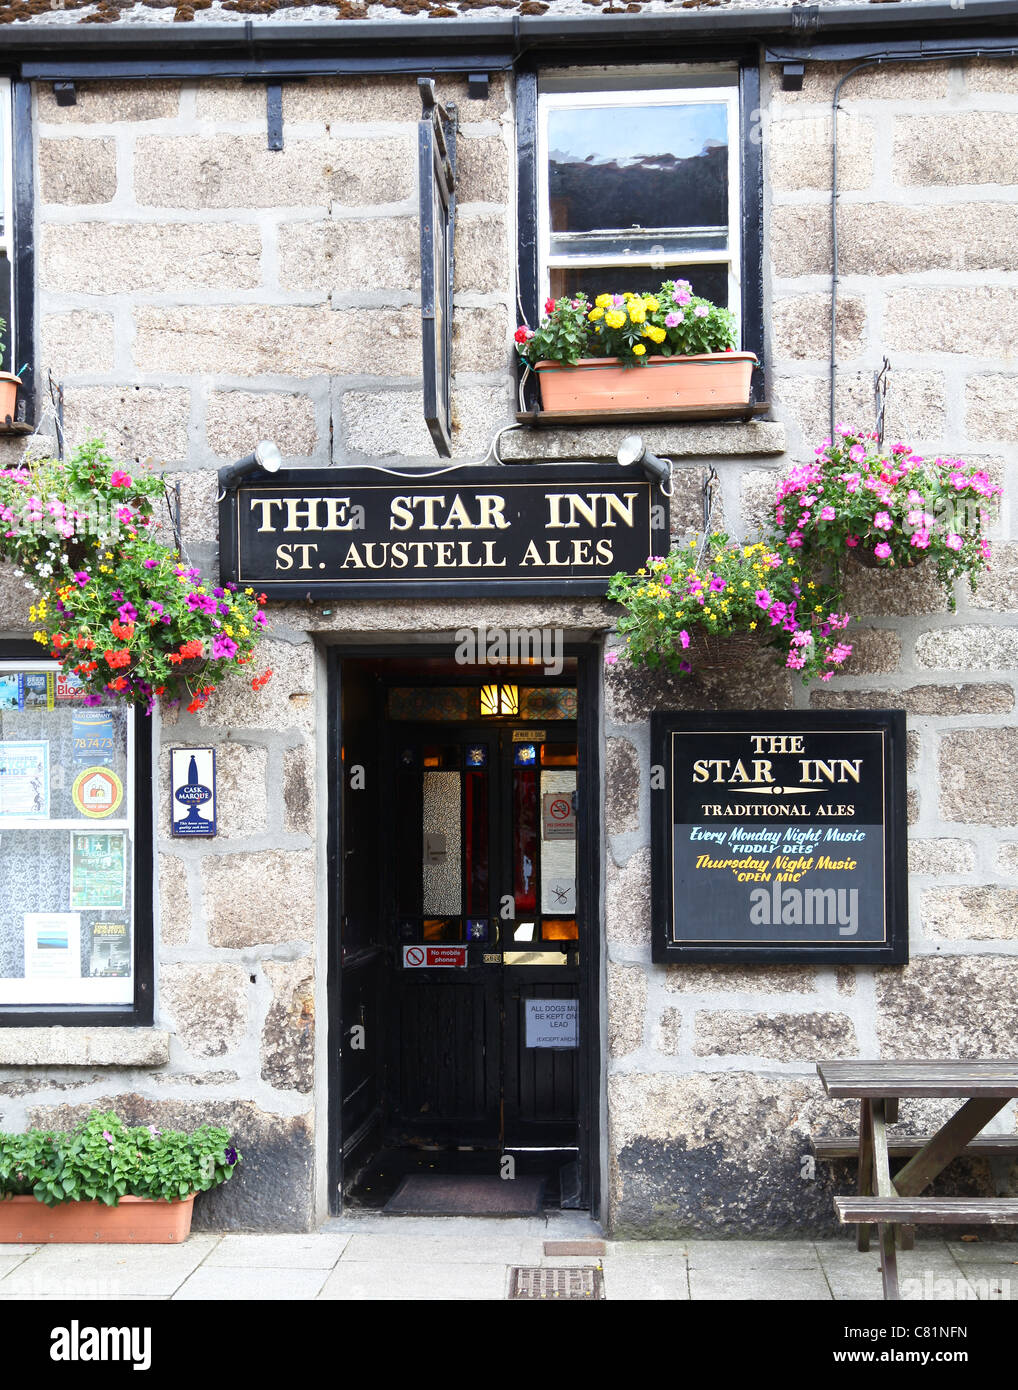 The doorway to the Public House or Pub, The Star Inn, St. Just, Cornwall, England, UK Stock Photo